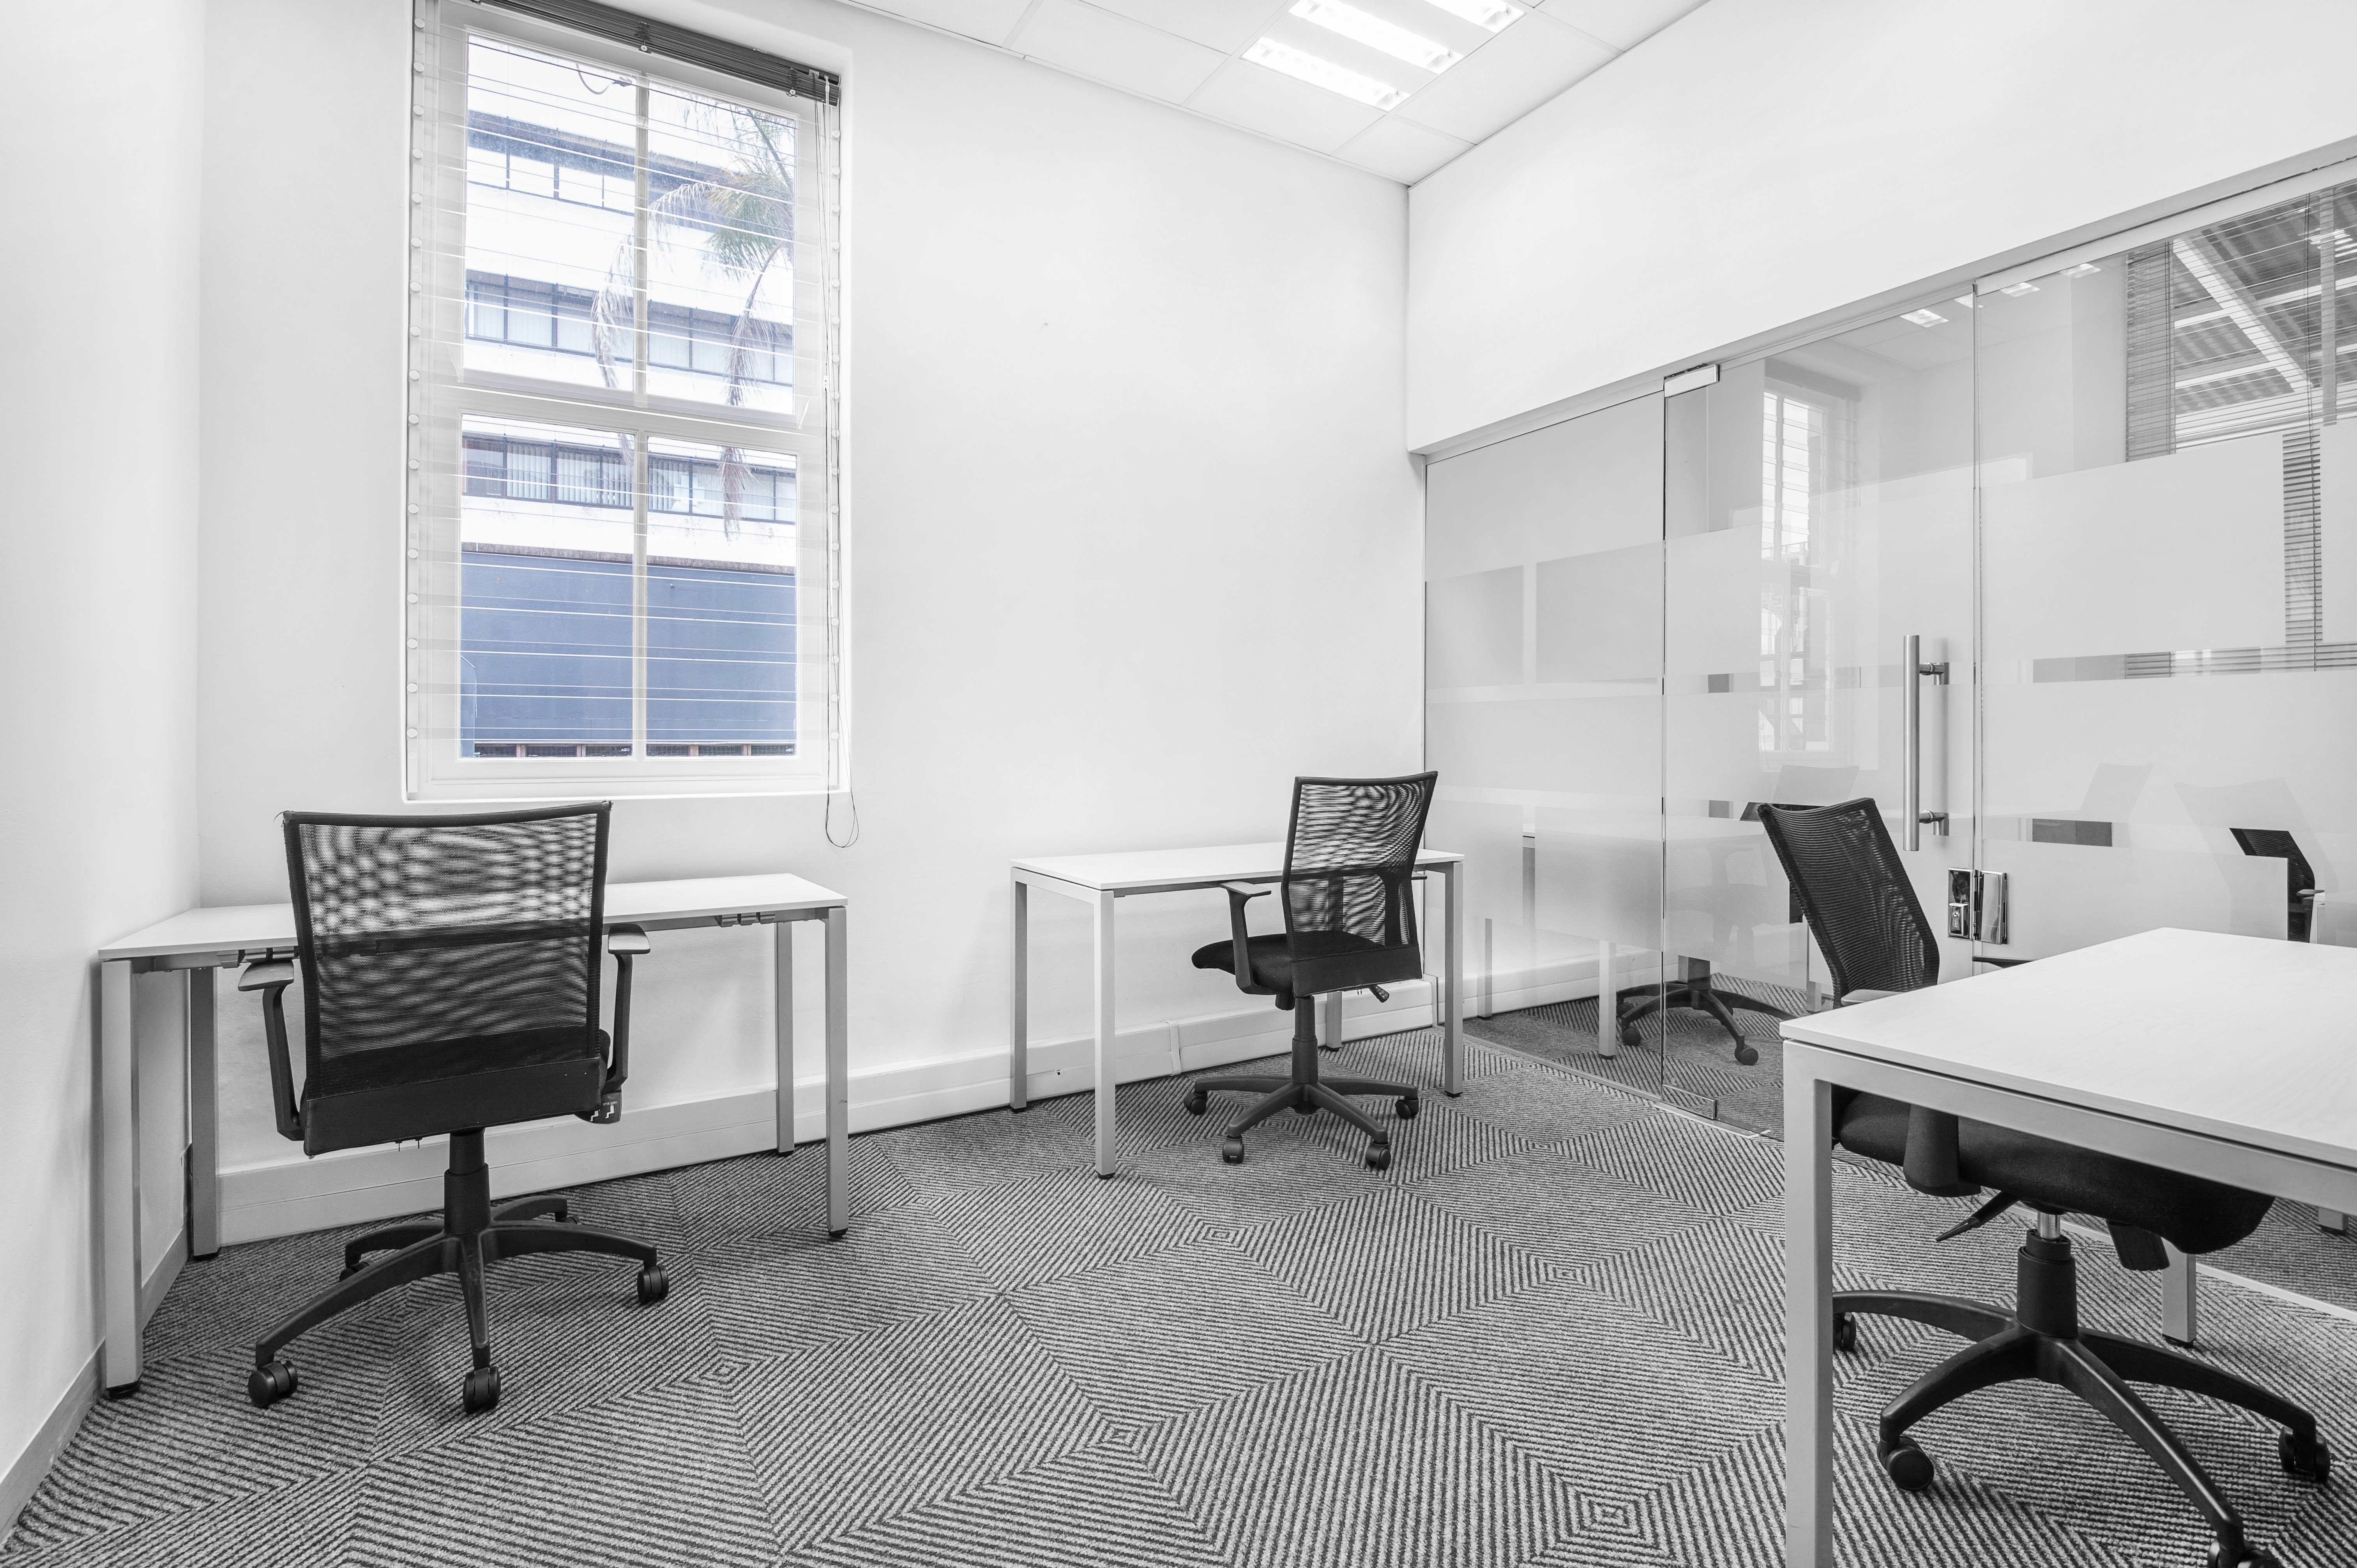 Offices to Let - Office Space for Rent Durban | Serviced Offices